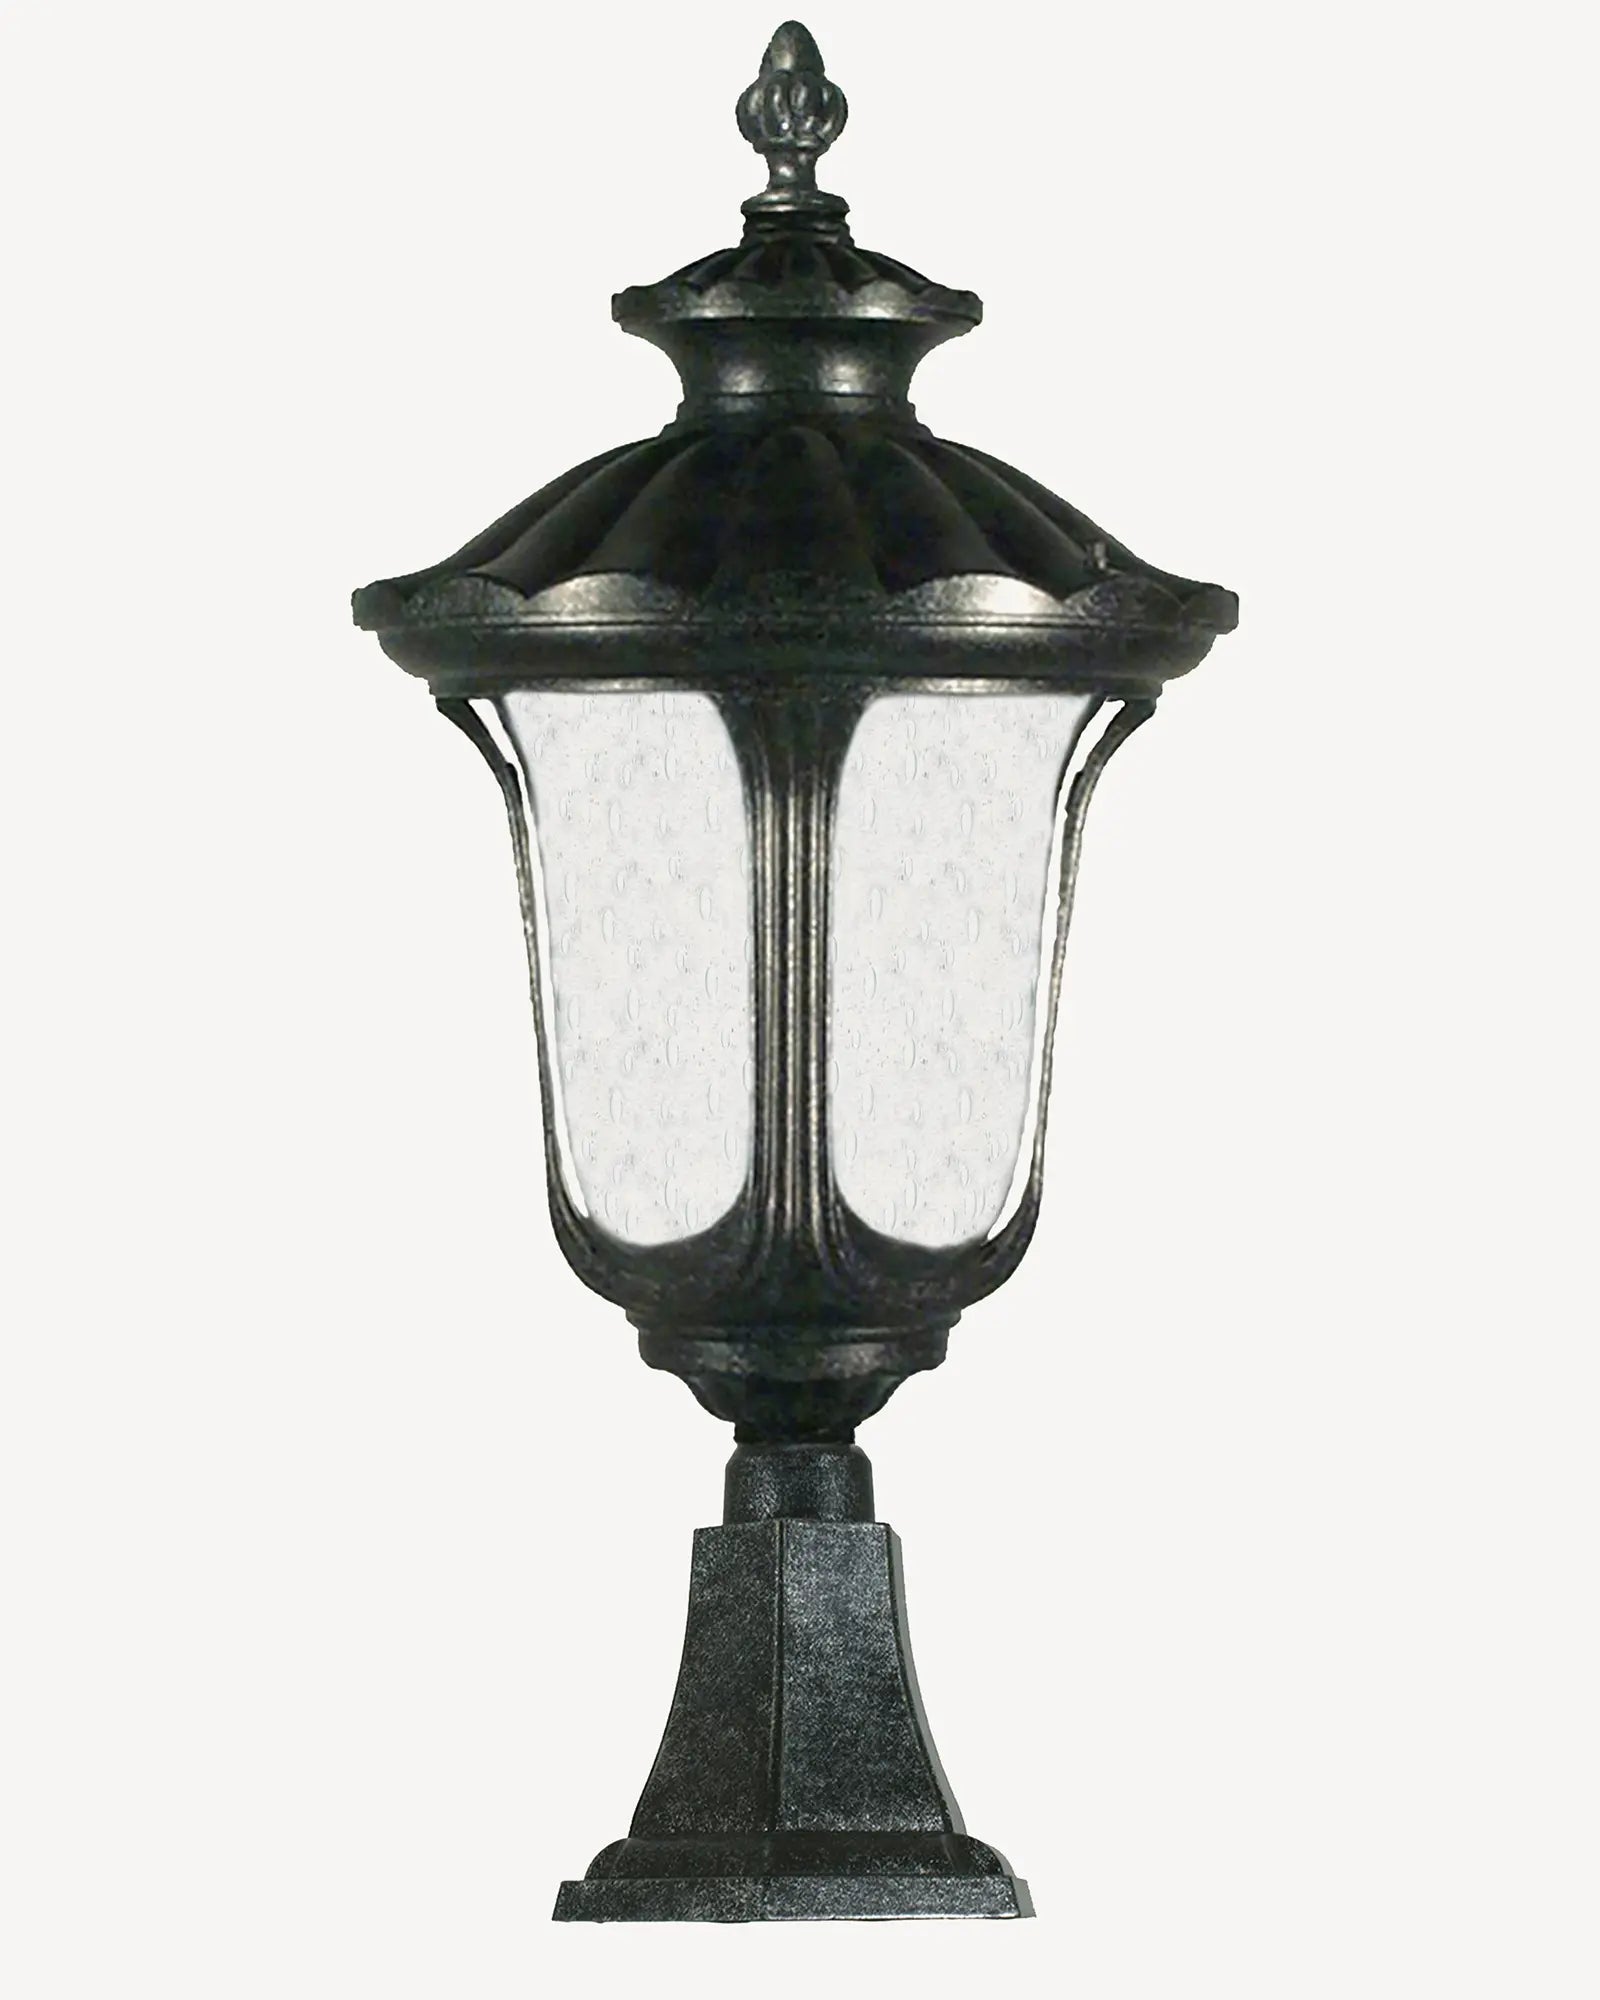 Waterford pedestal light by Inspiration Light at Nook Collections